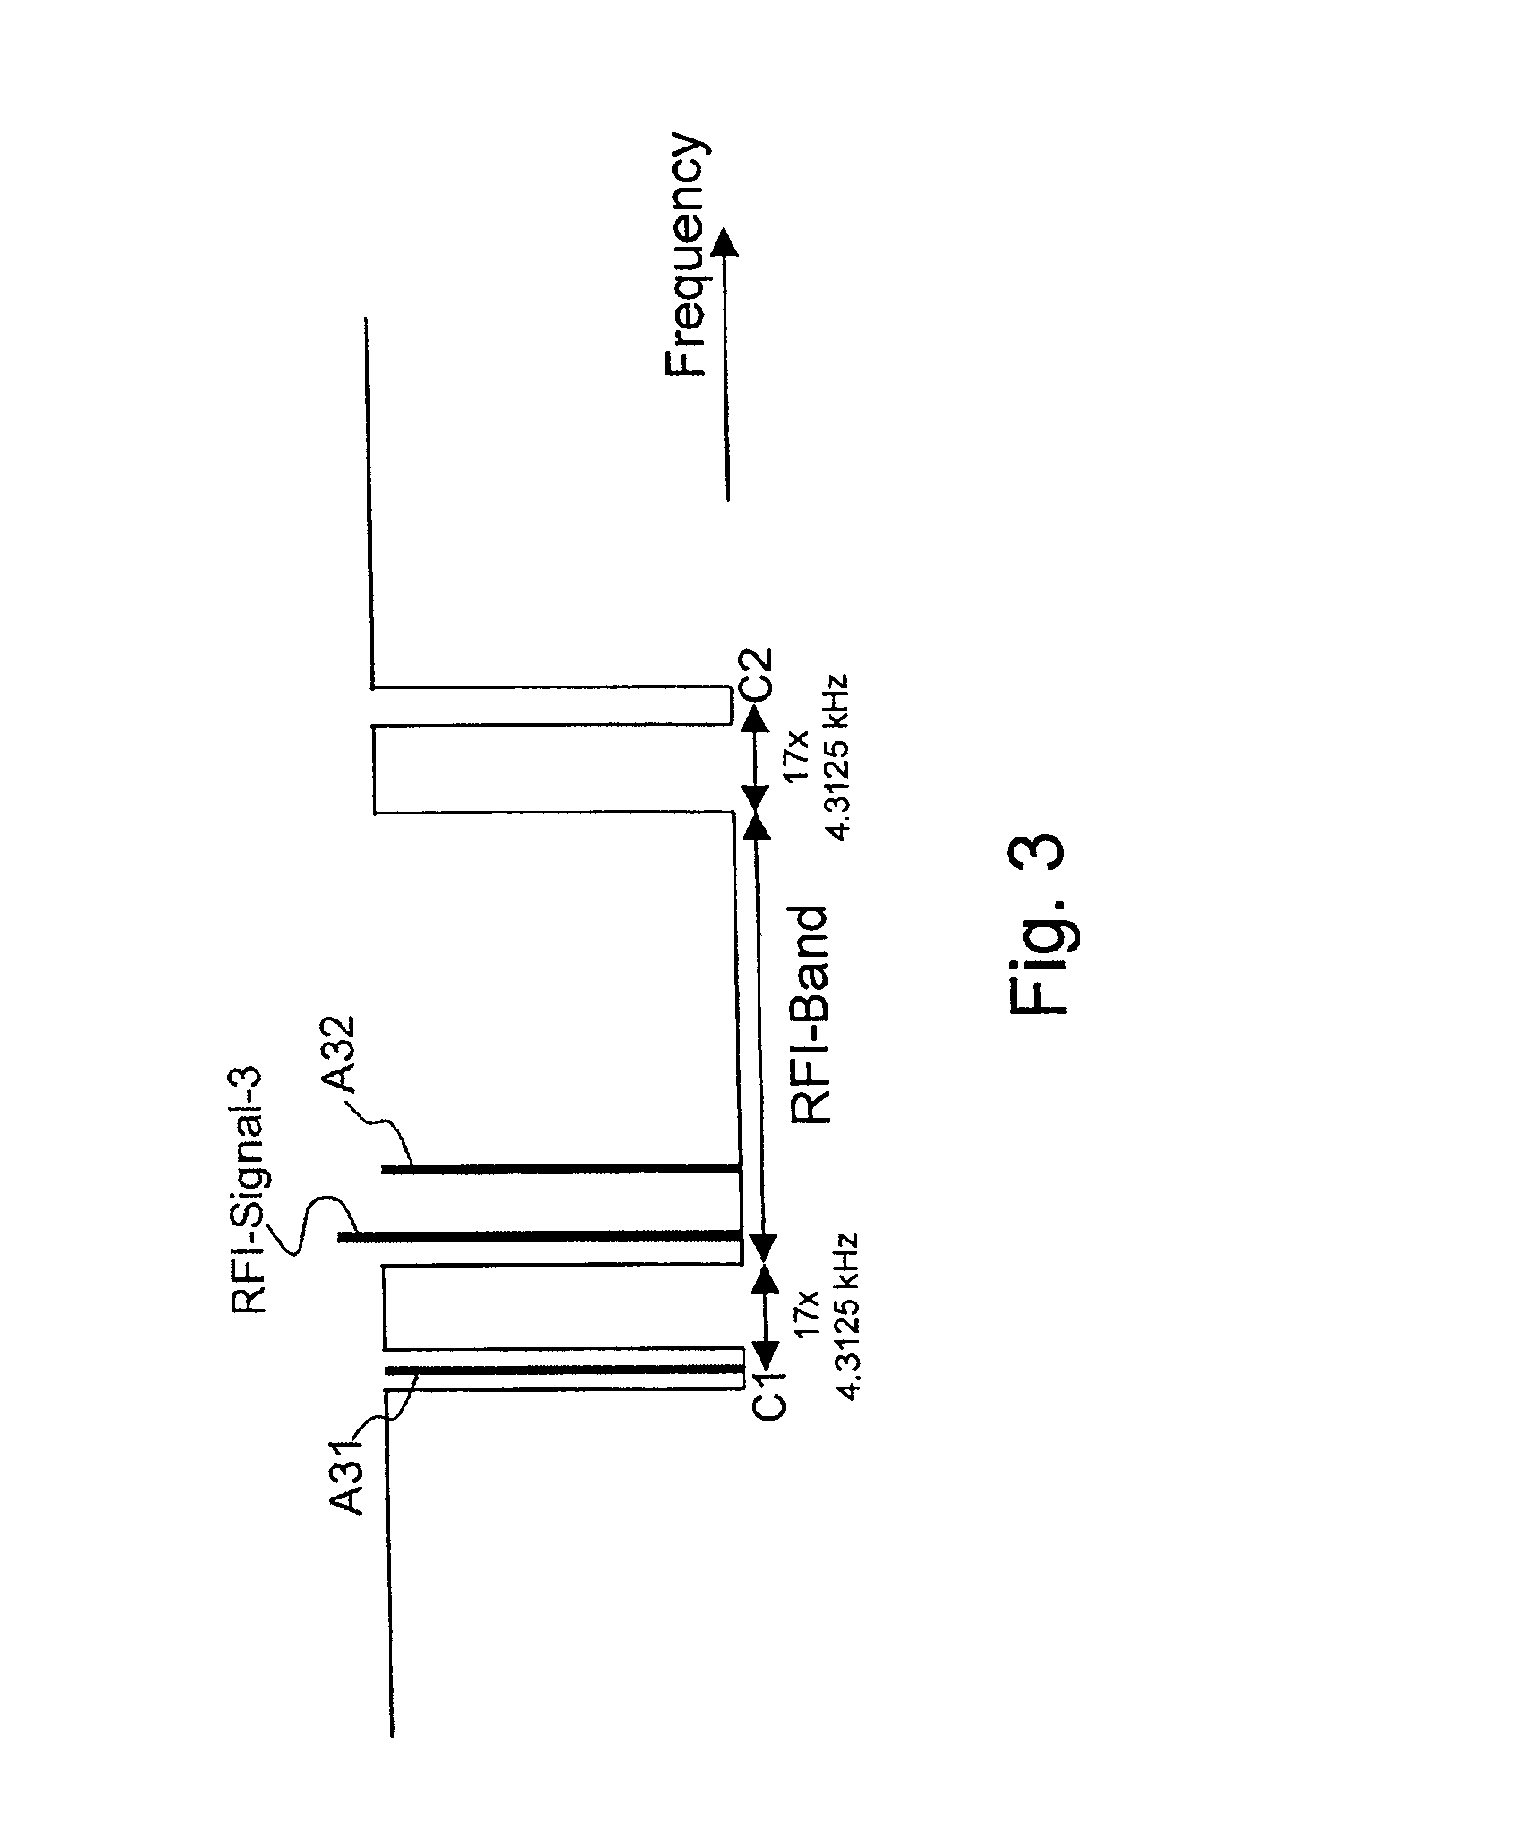 Multi-carrier receiver with improved radio frequency interference canceling